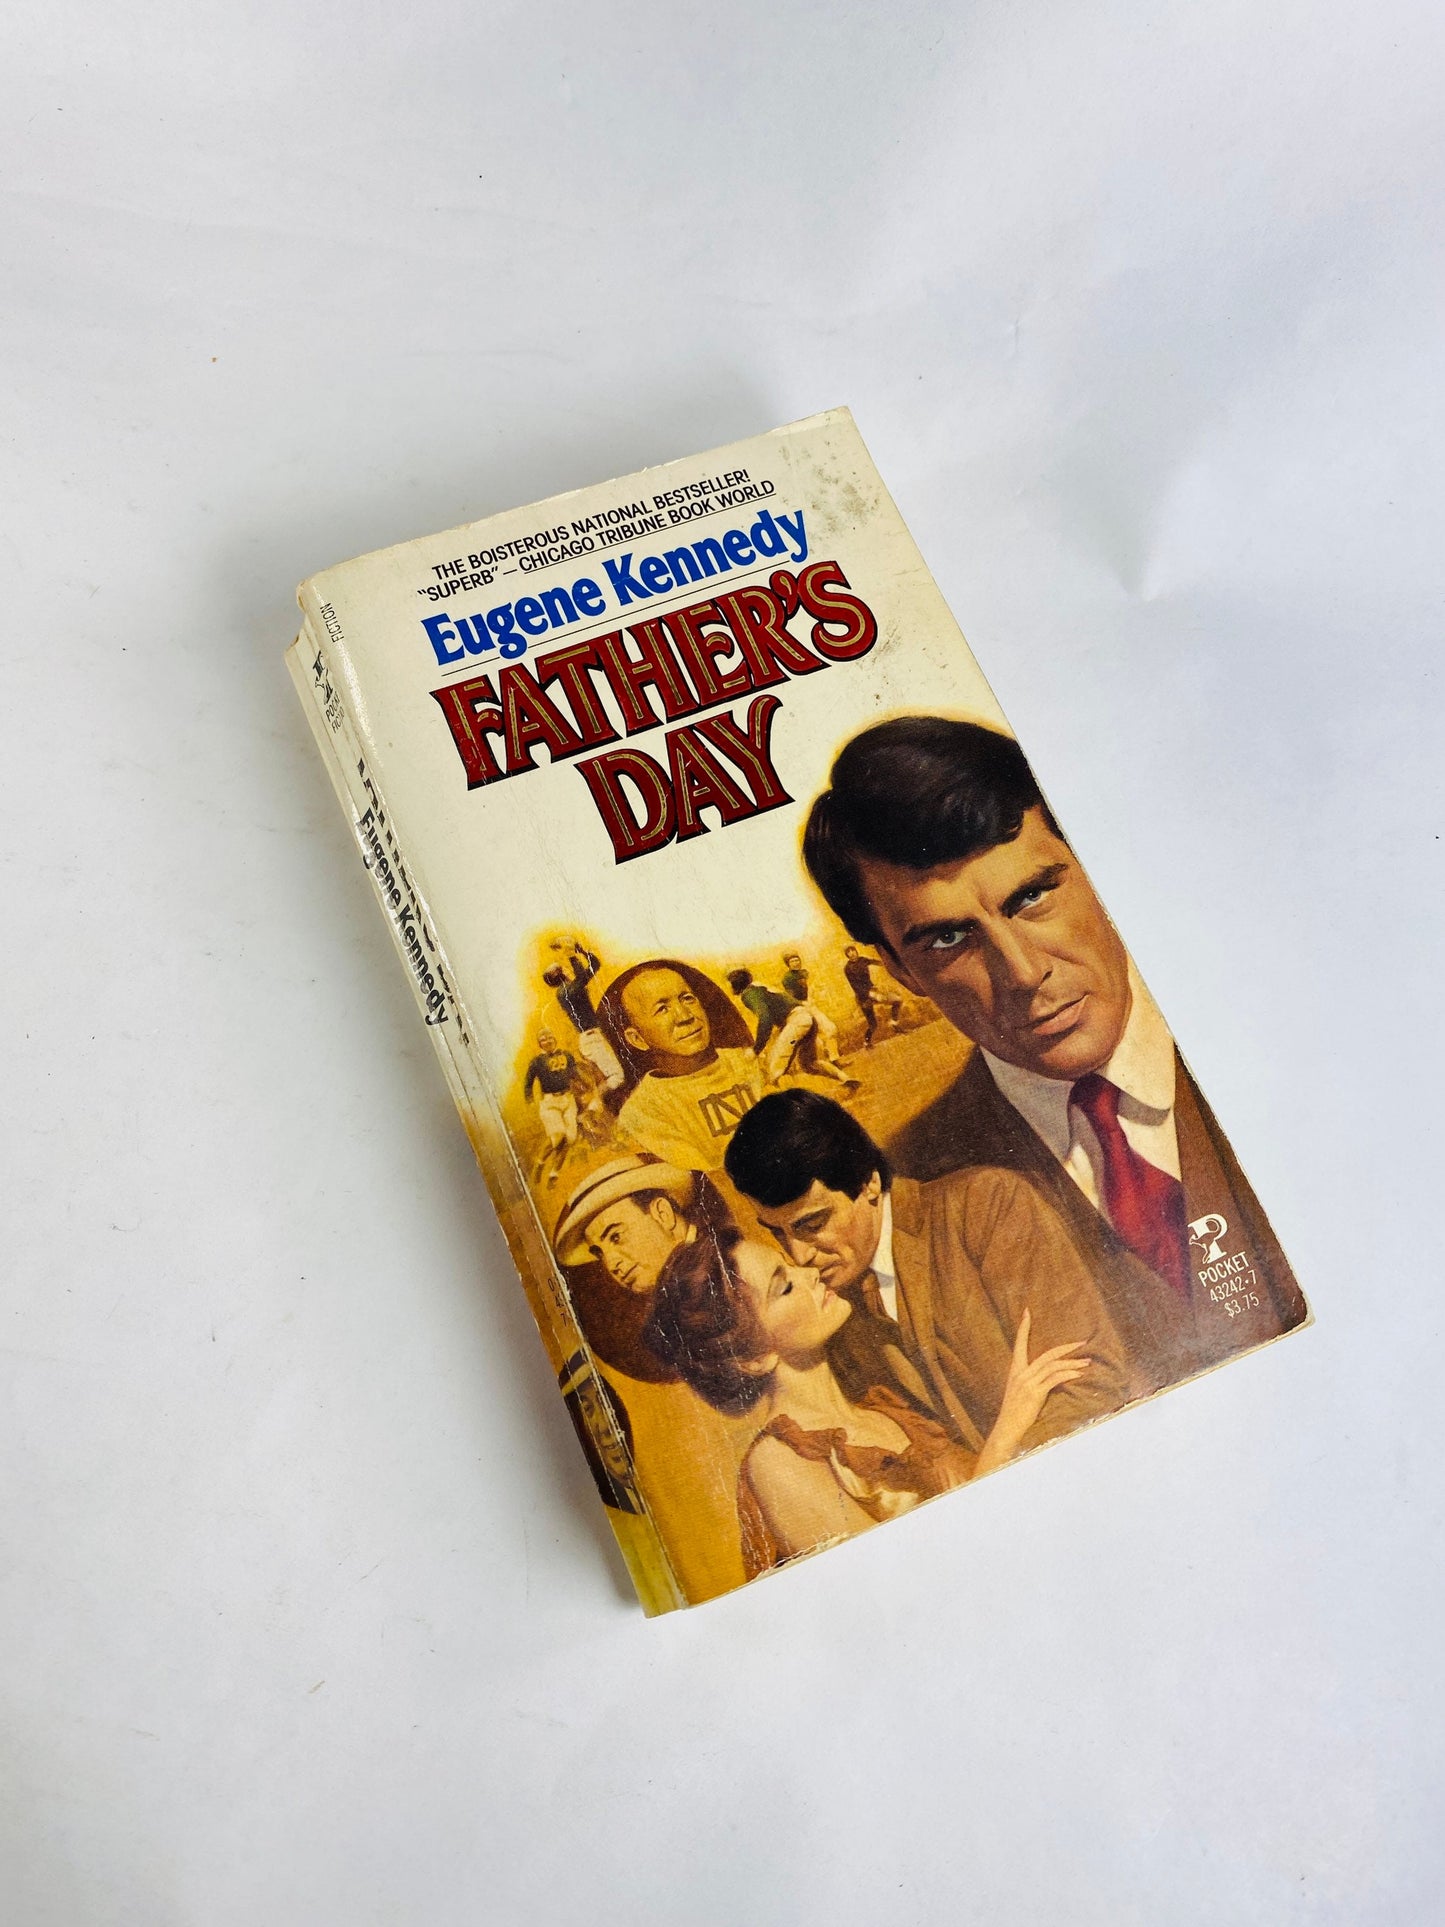 Eugene Kennedy Father’s Day Early PRINTING vintage paperback book by former professor and Catholic priest about crime in Chicago.